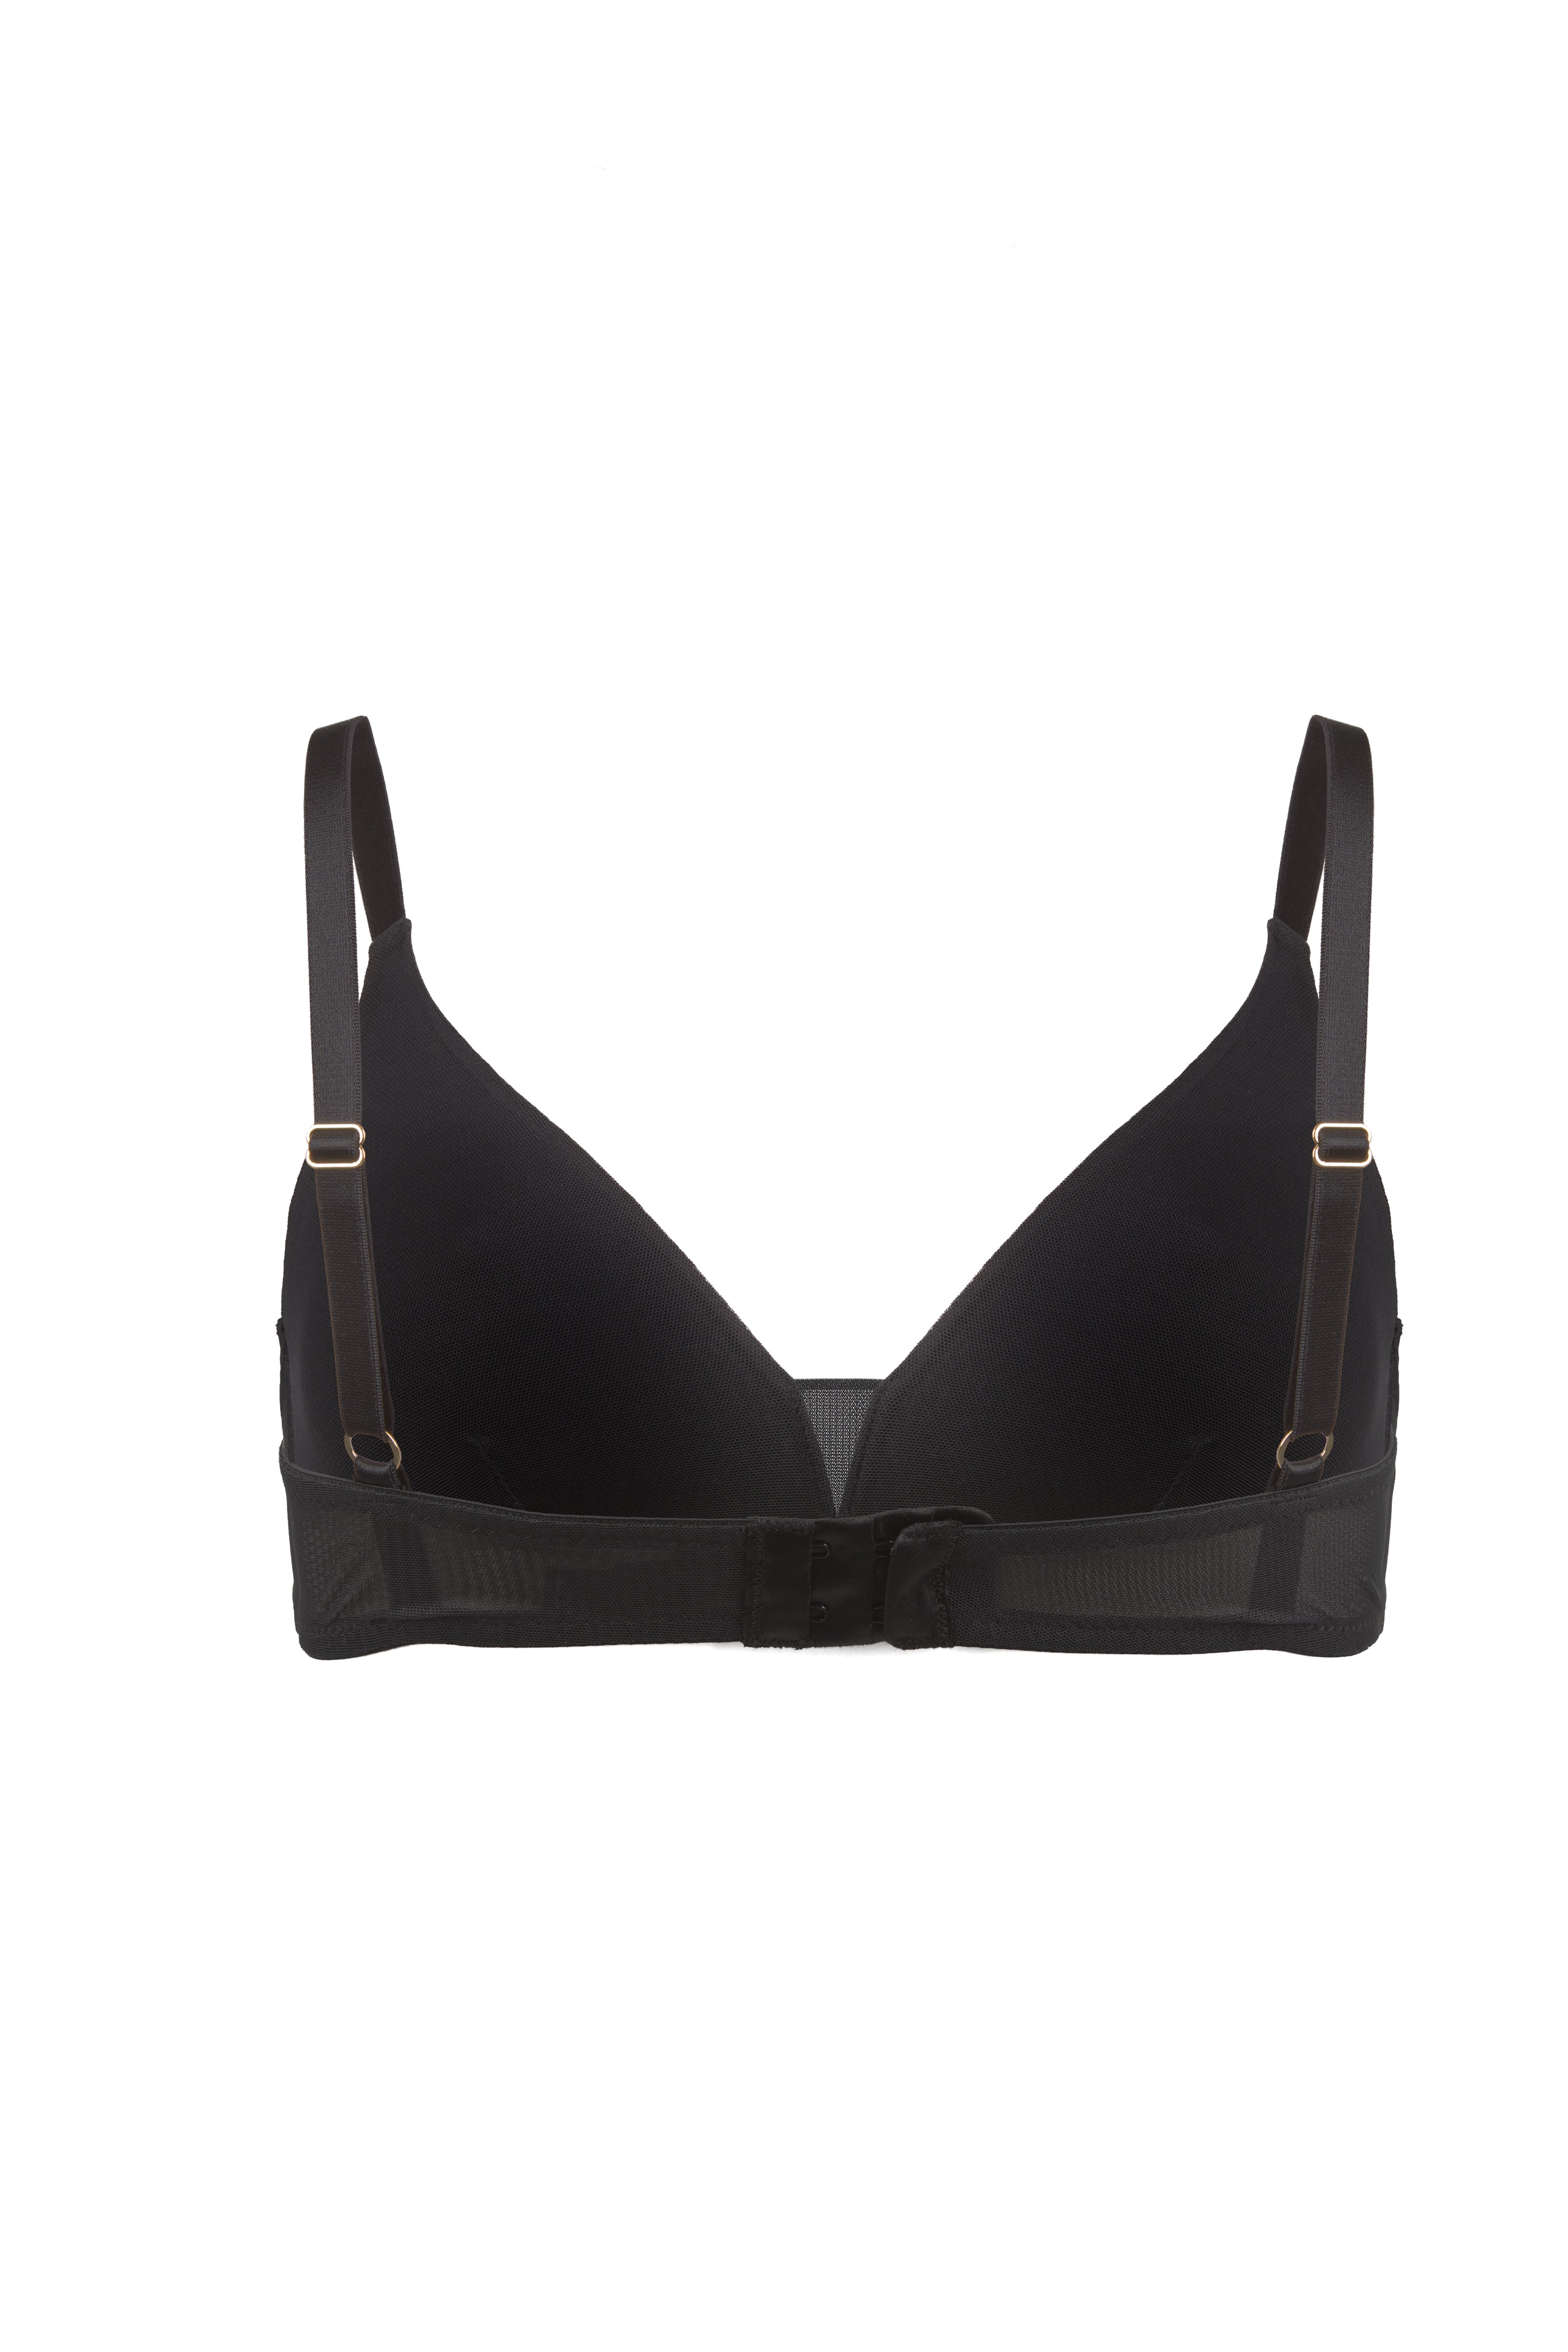 Black, non-wired bra Pure Soft made of polyamide by MOYA KALA